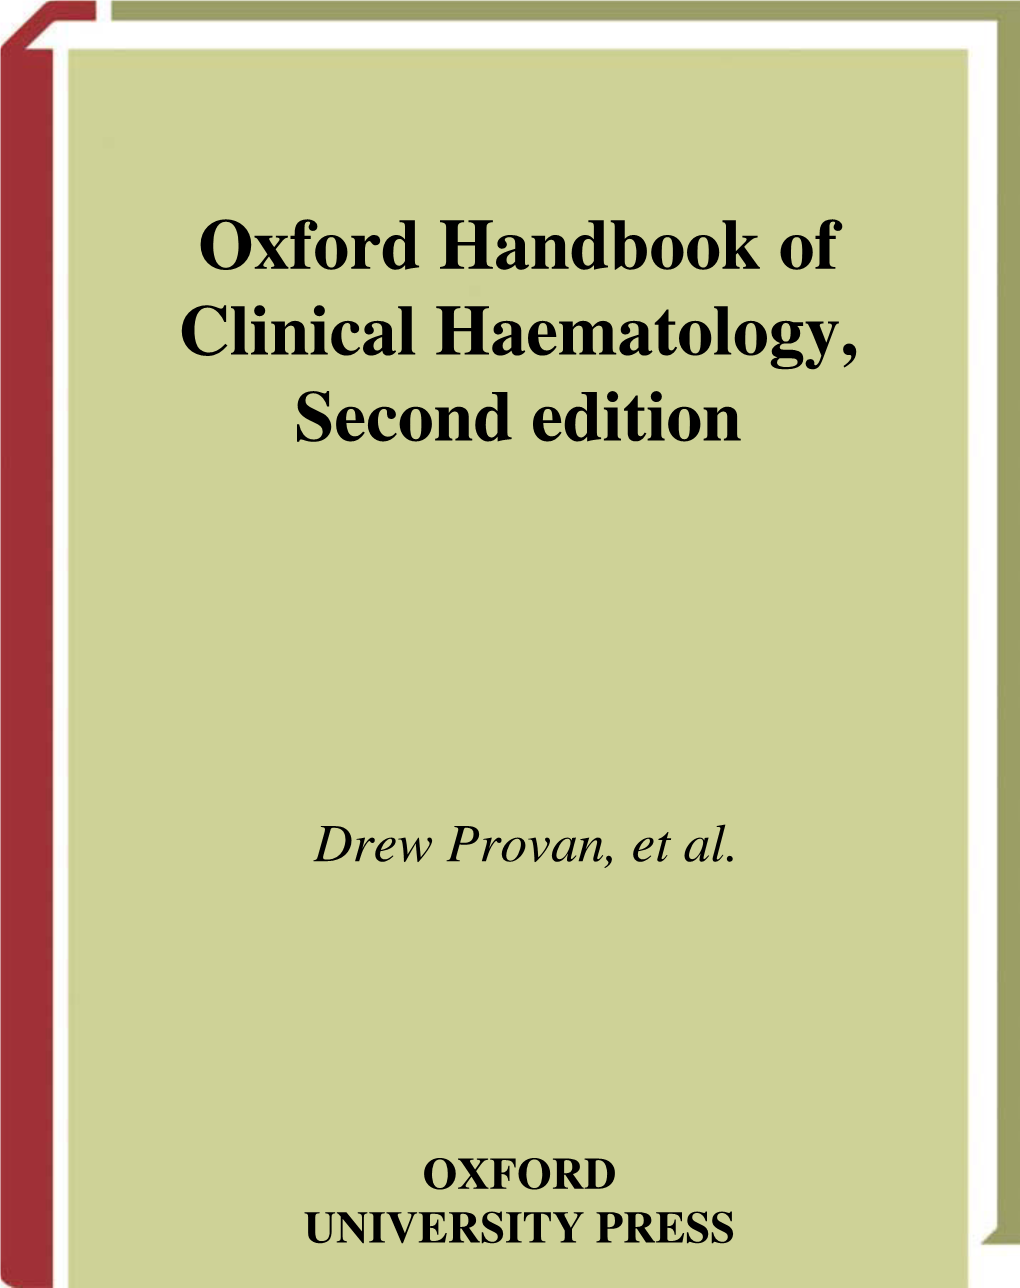 Oxford Handbook of Clinical Haematology, Second Edition